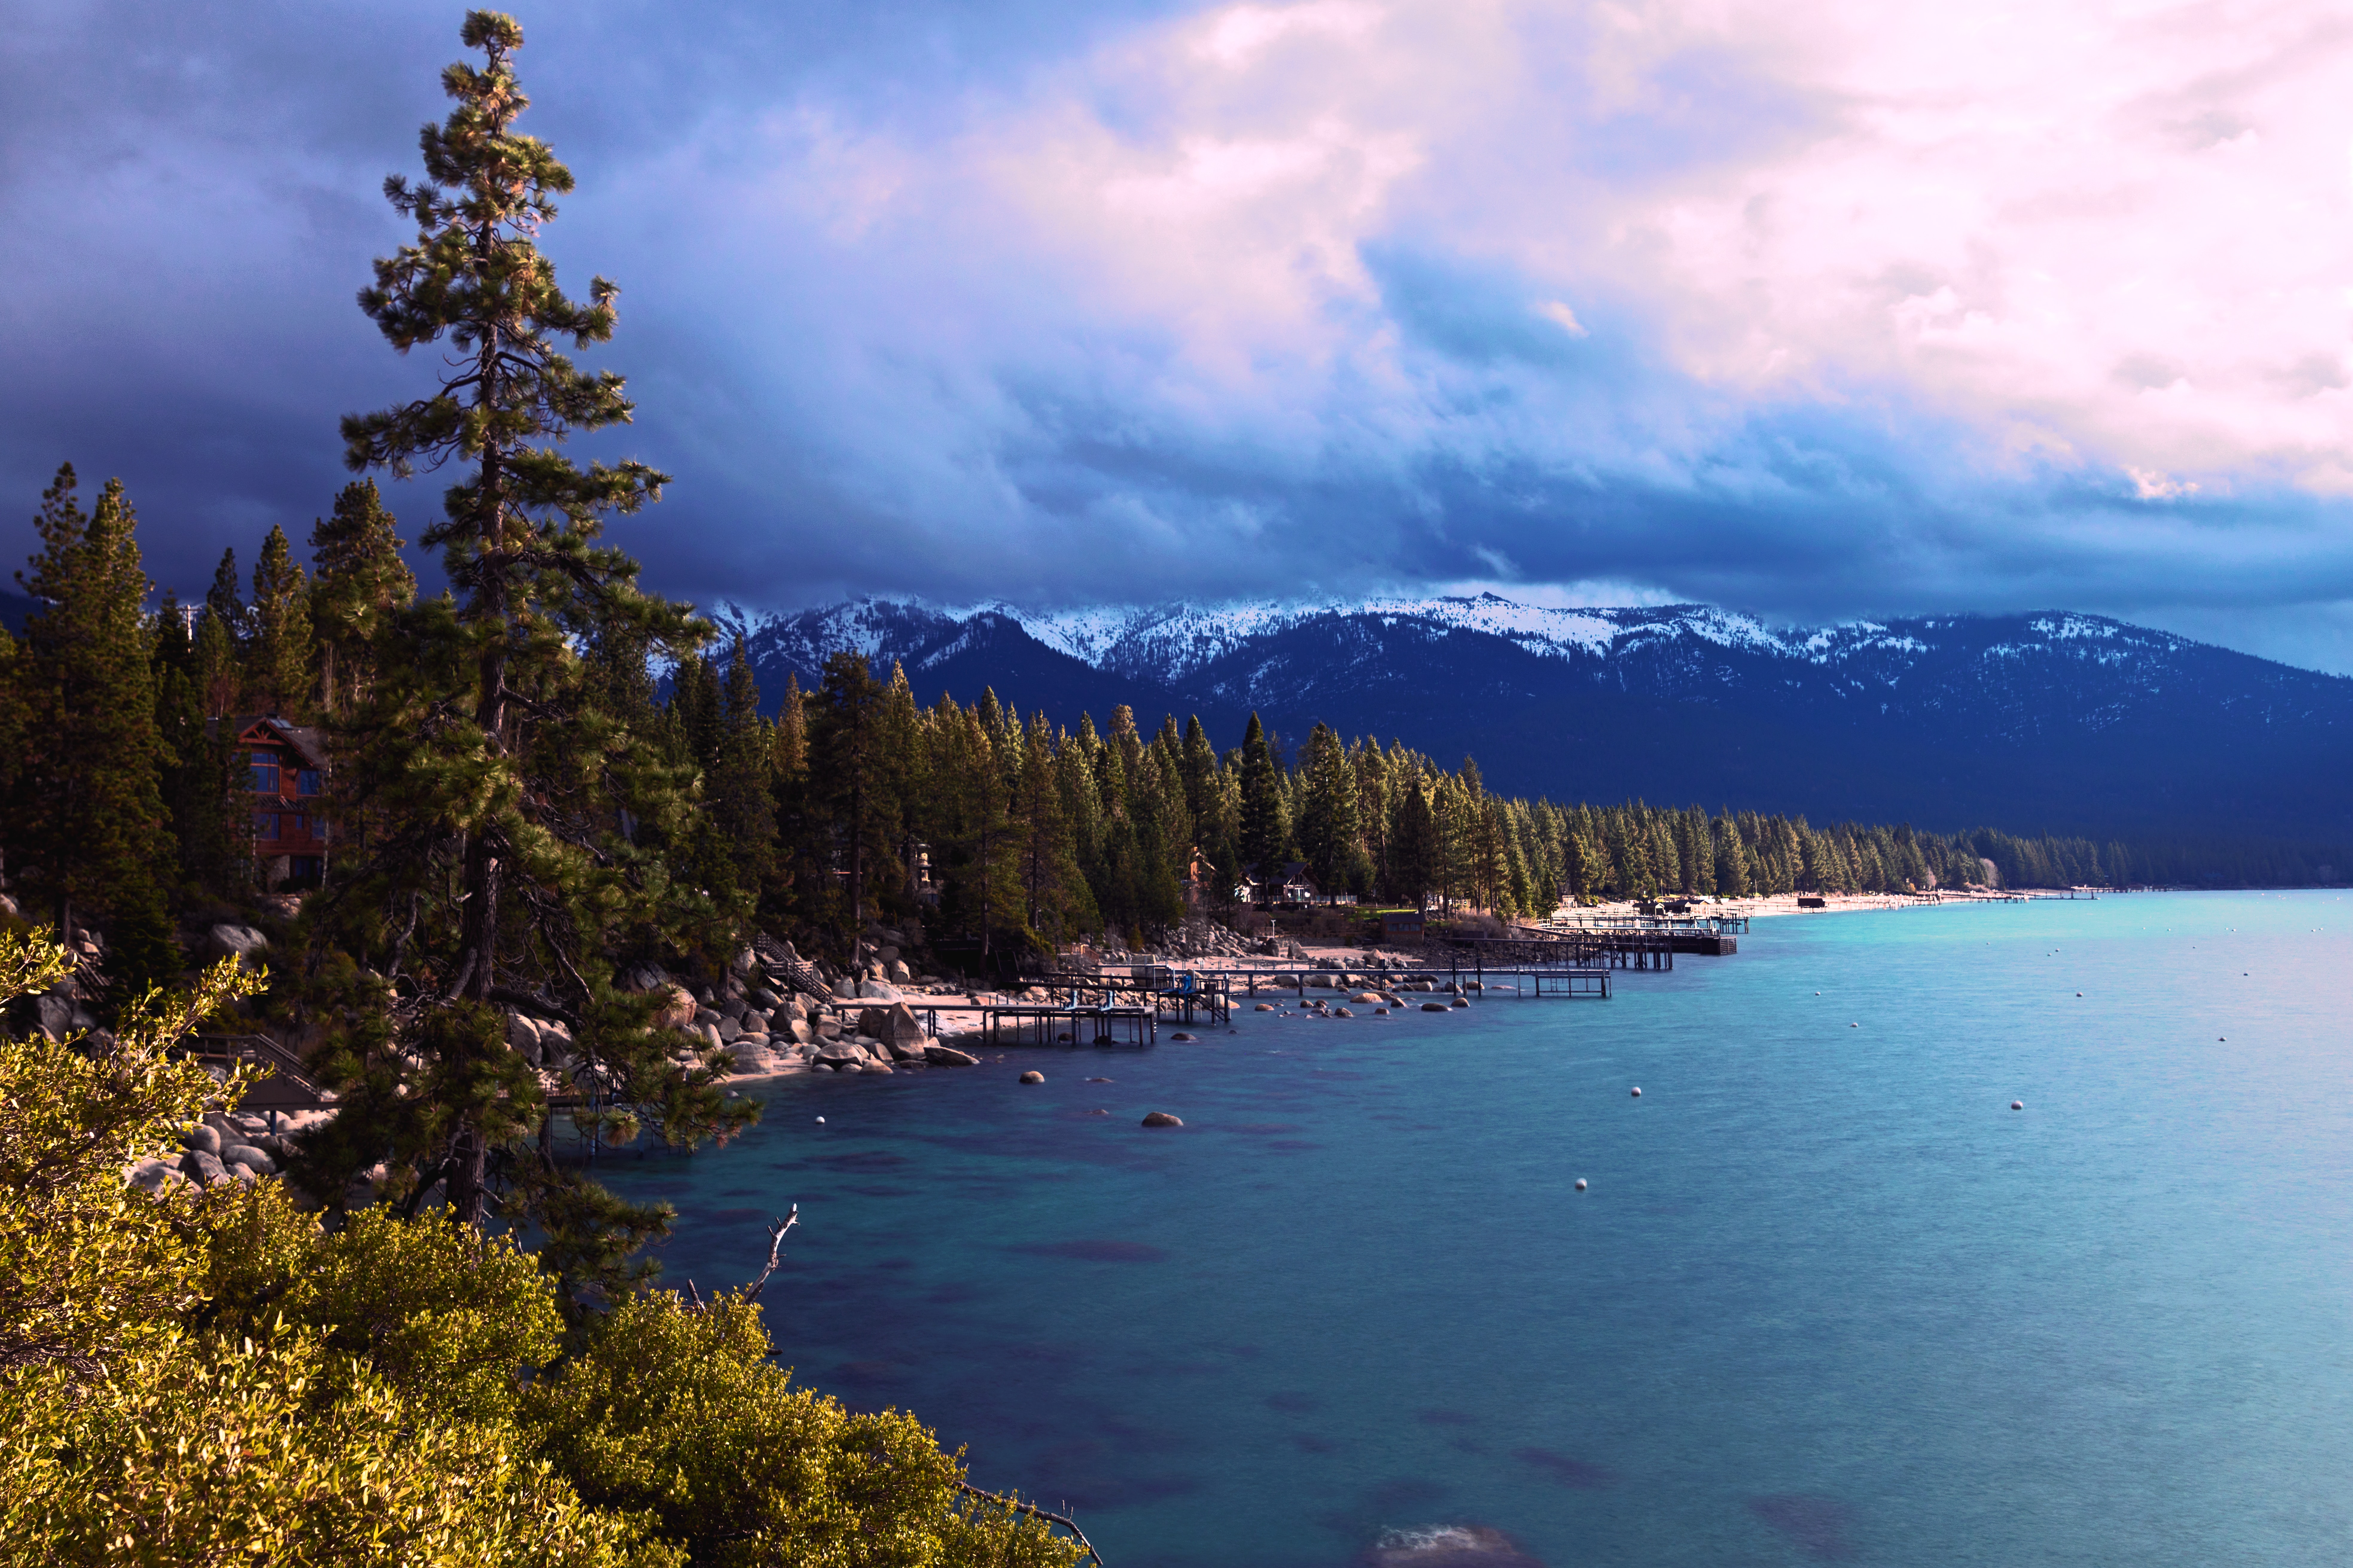 Daniel Doyle Pleasantville Shares Why Lake Tahoe Is The Perfect Escape For Photographers